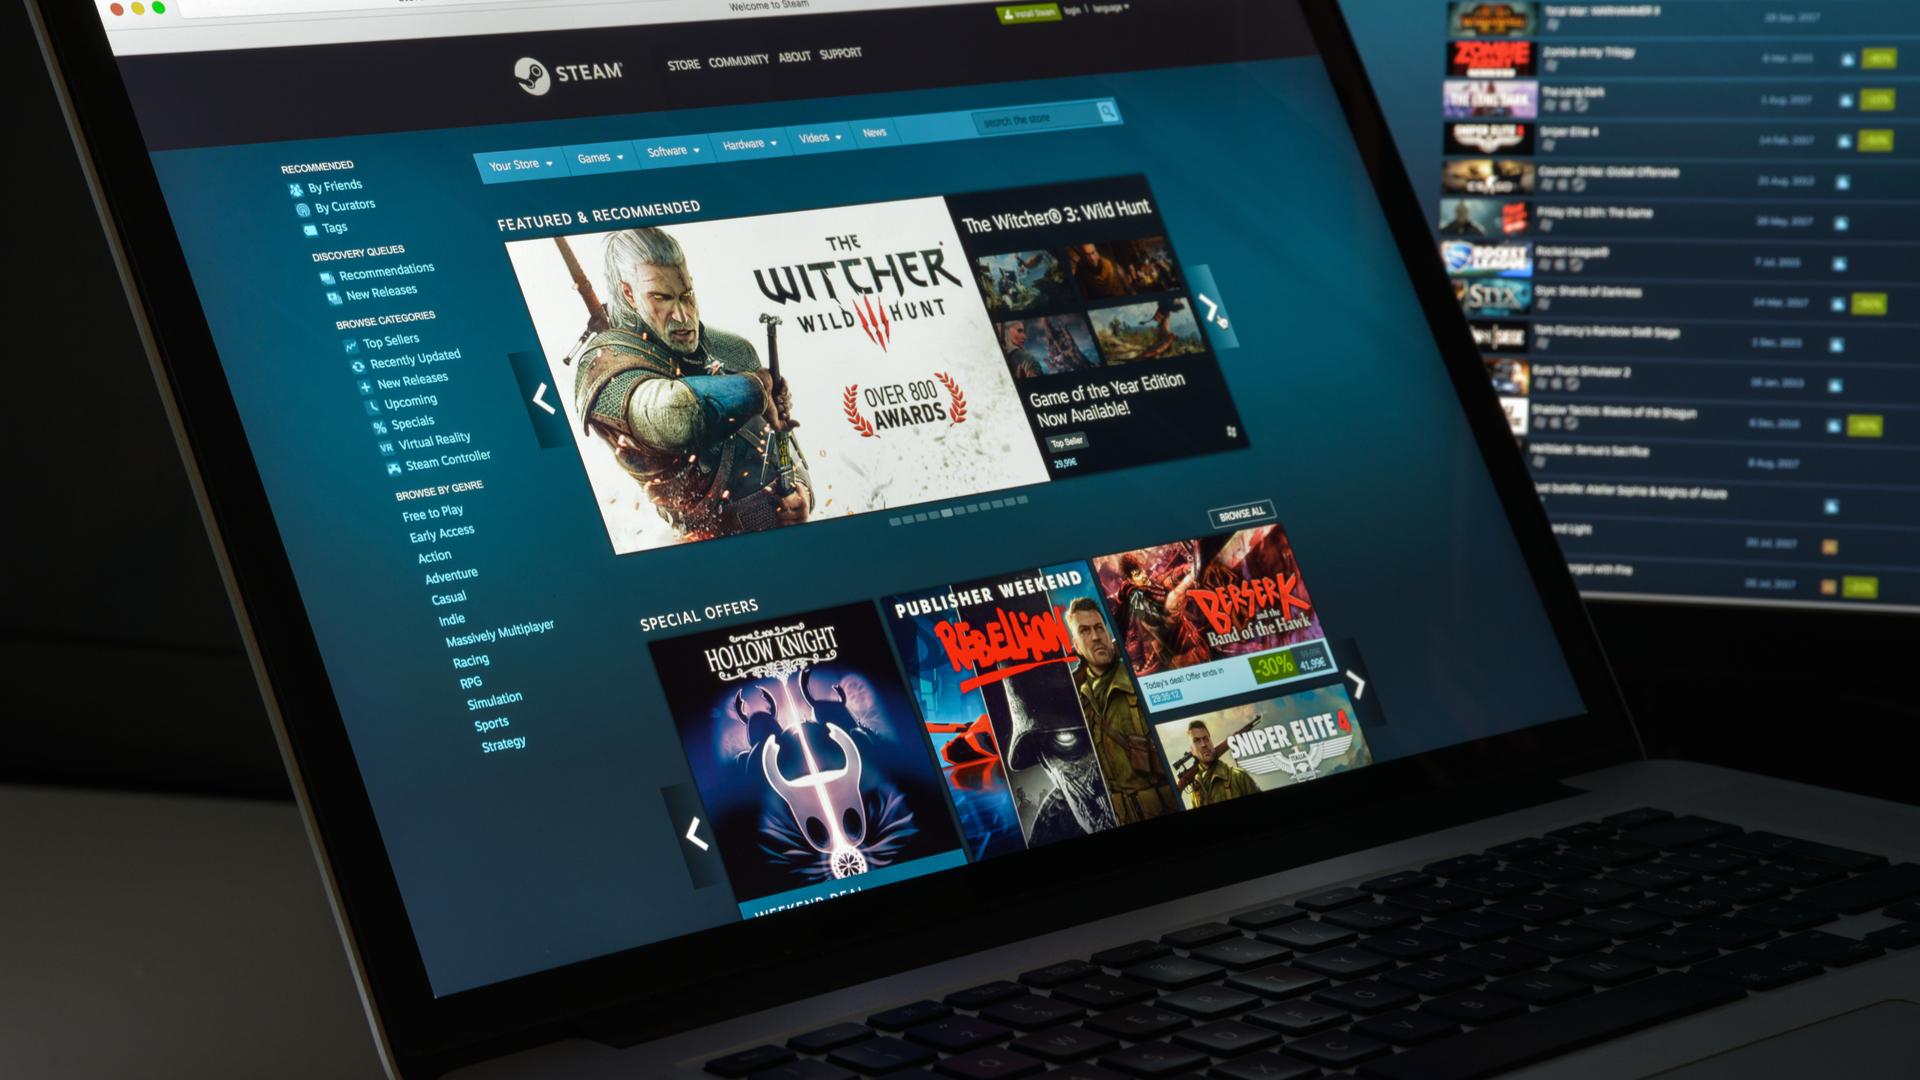 Steam store showing on a Windows laptop